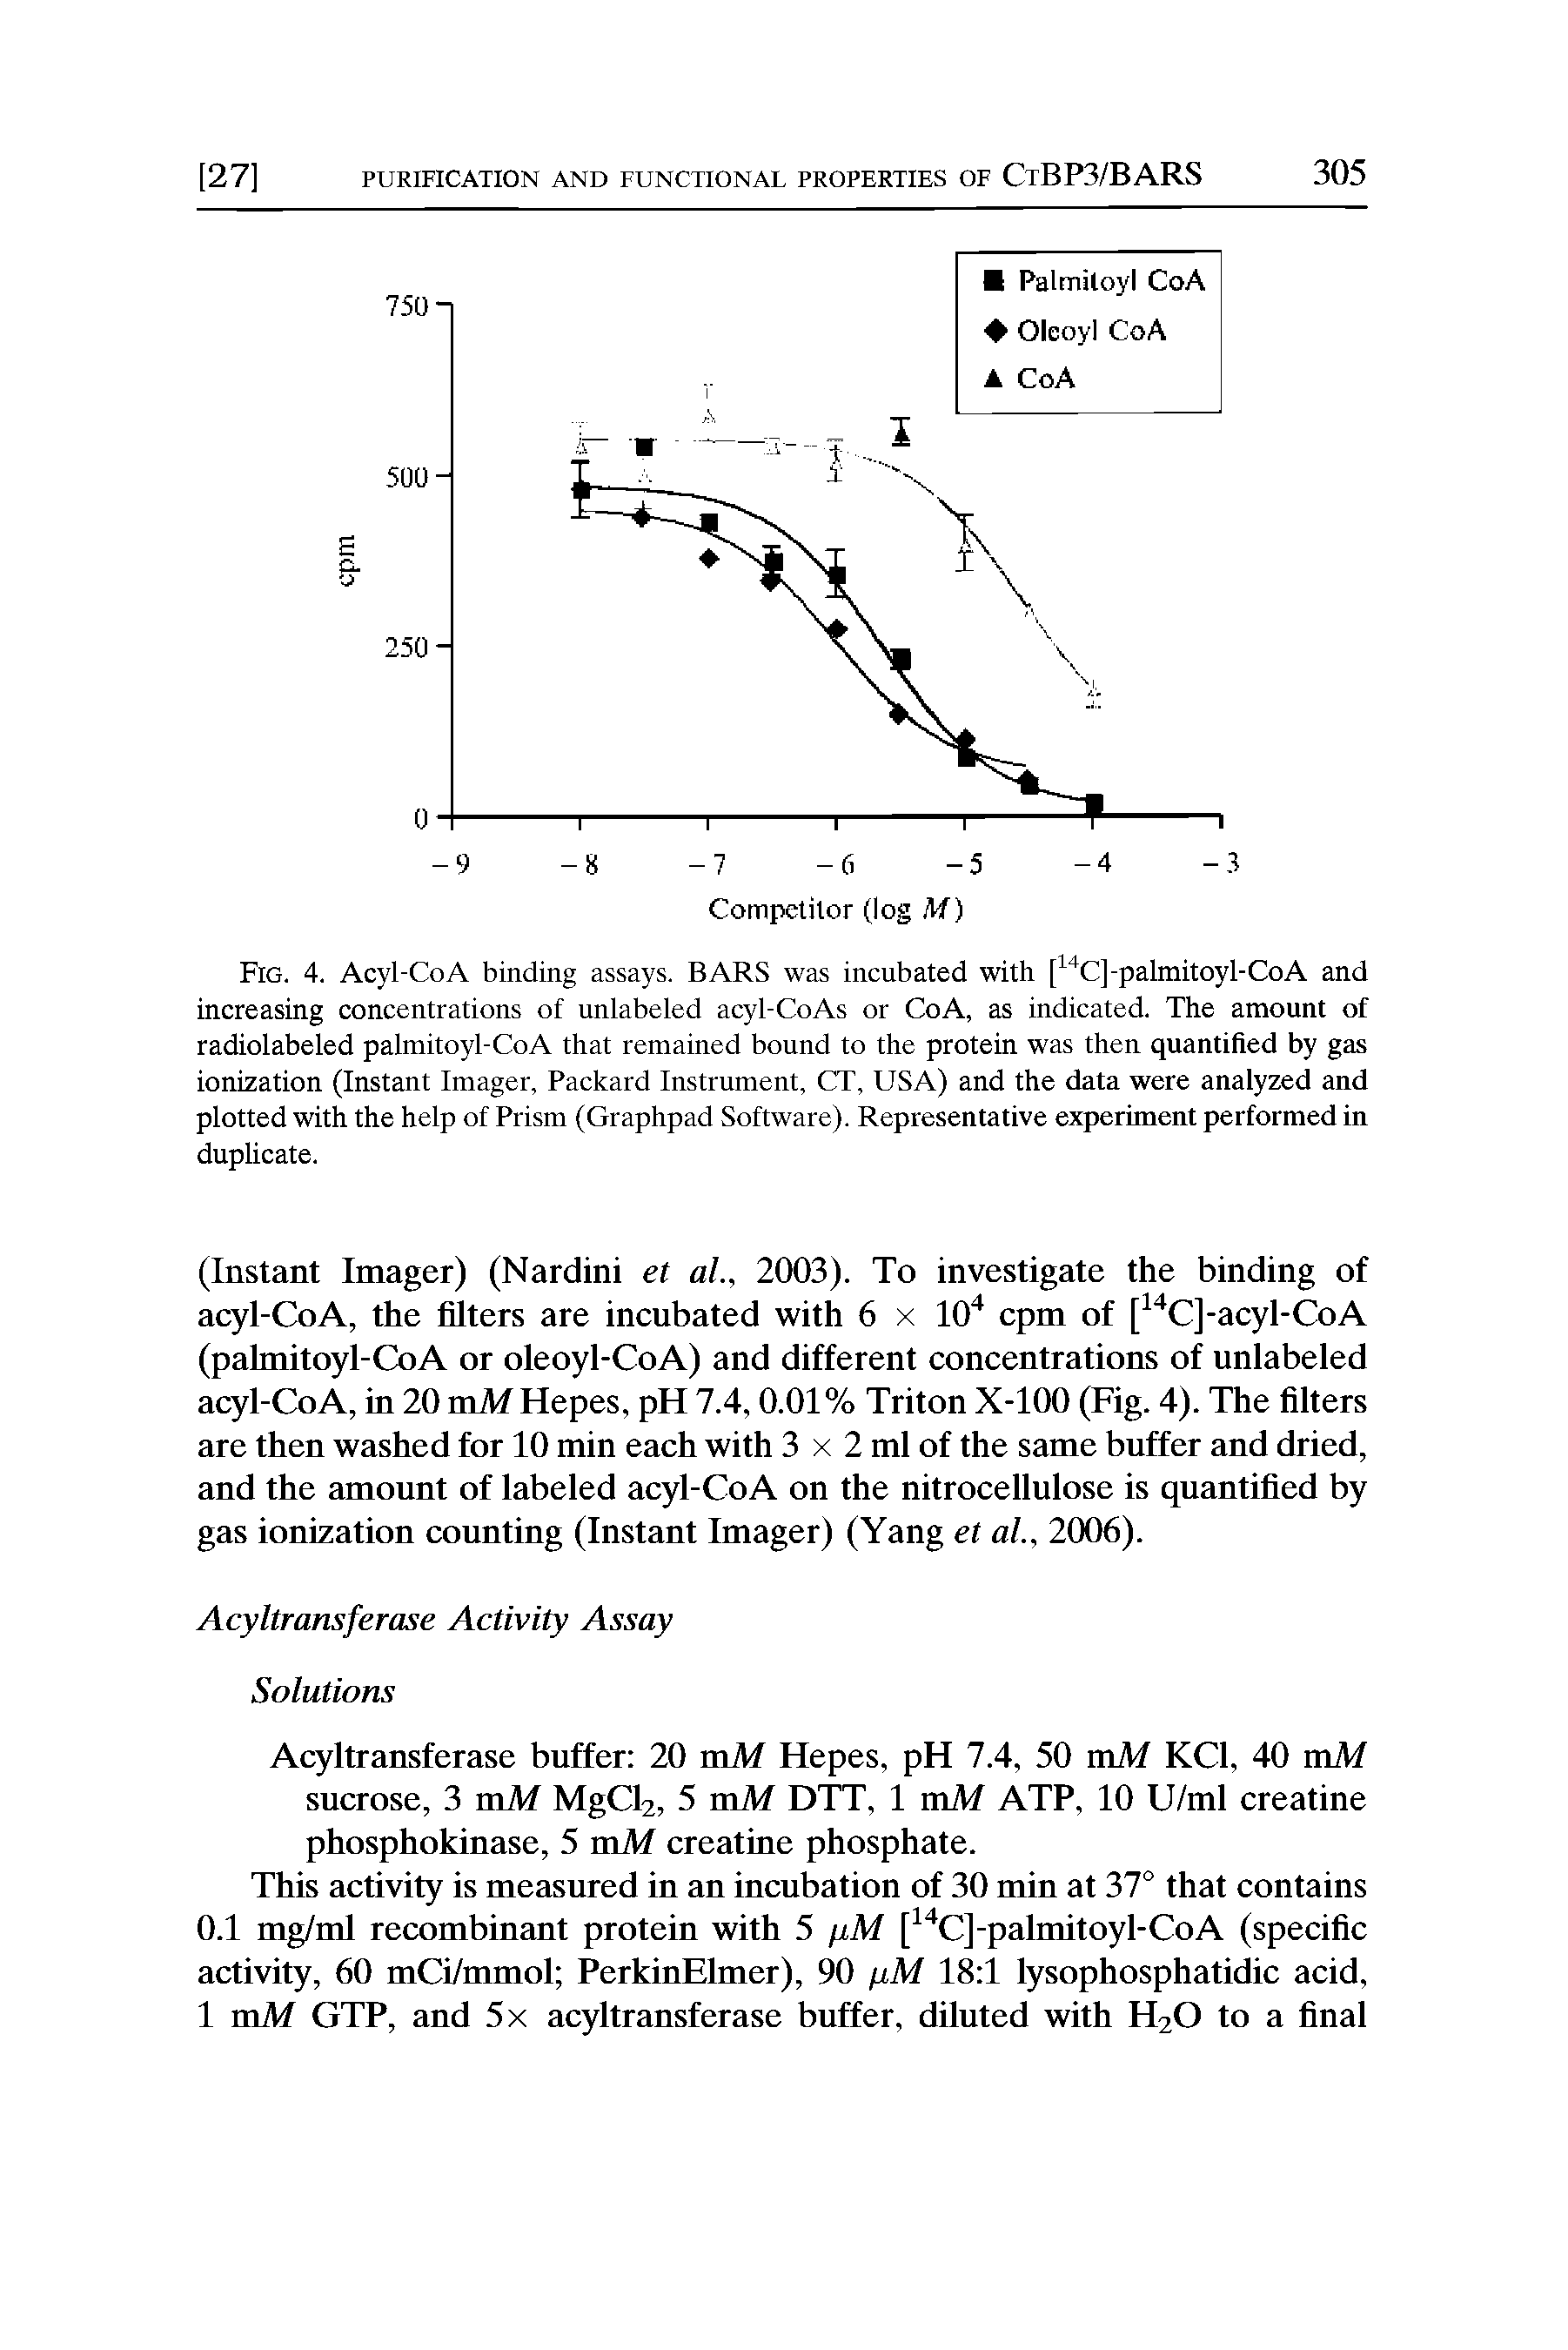 Fig. 4. Acyl-CoA binding assays. BARS was incubated with [ Cj-pahnitoyl-CoA and increasing concentrations of unlabeled acyl-CoAs or CoA, as indicated. The amount of radiolabeled pahnitoyl-CoA that remained bound to the protein was then quantified by gas ionization (Instant Imager, Packard Instrument, CT, USA) and the data were analyzed and plotted with the help of Prism (Graphpad Software). Representative experiment performed in duplicate.